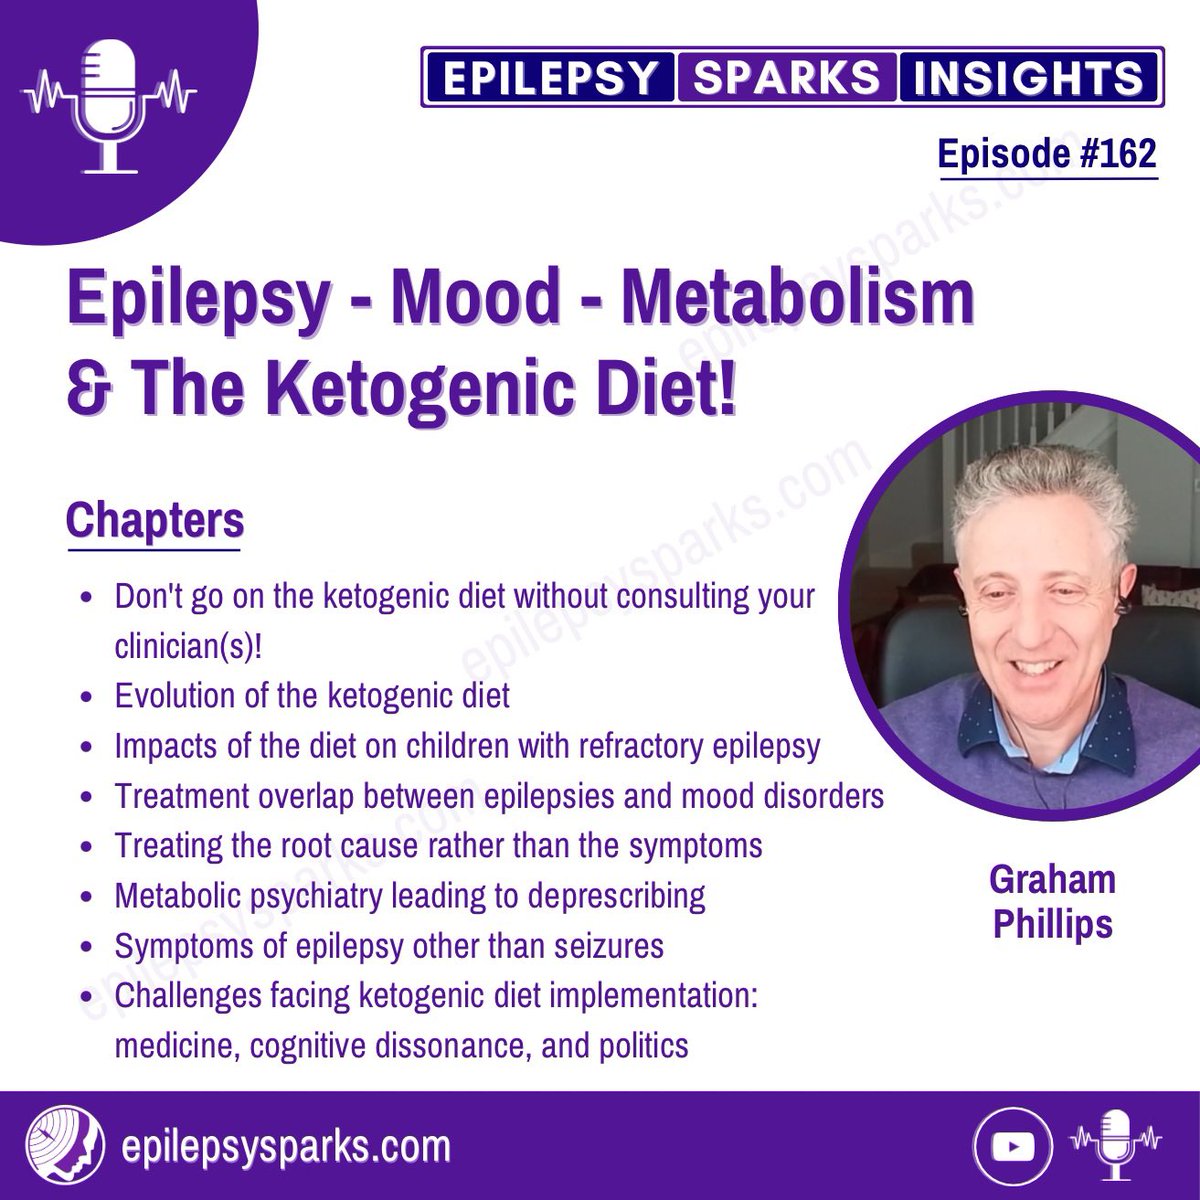 This is wild: Did you know that there’s a thing called “metabolic psychiatry” in which the ketogenic diet 🧈🍗🥓 is being used to help people with #bipolar, #emotionaldisorder, major depressive disorder, and #schizophrenia?! So, given that the diet can also be used to treat